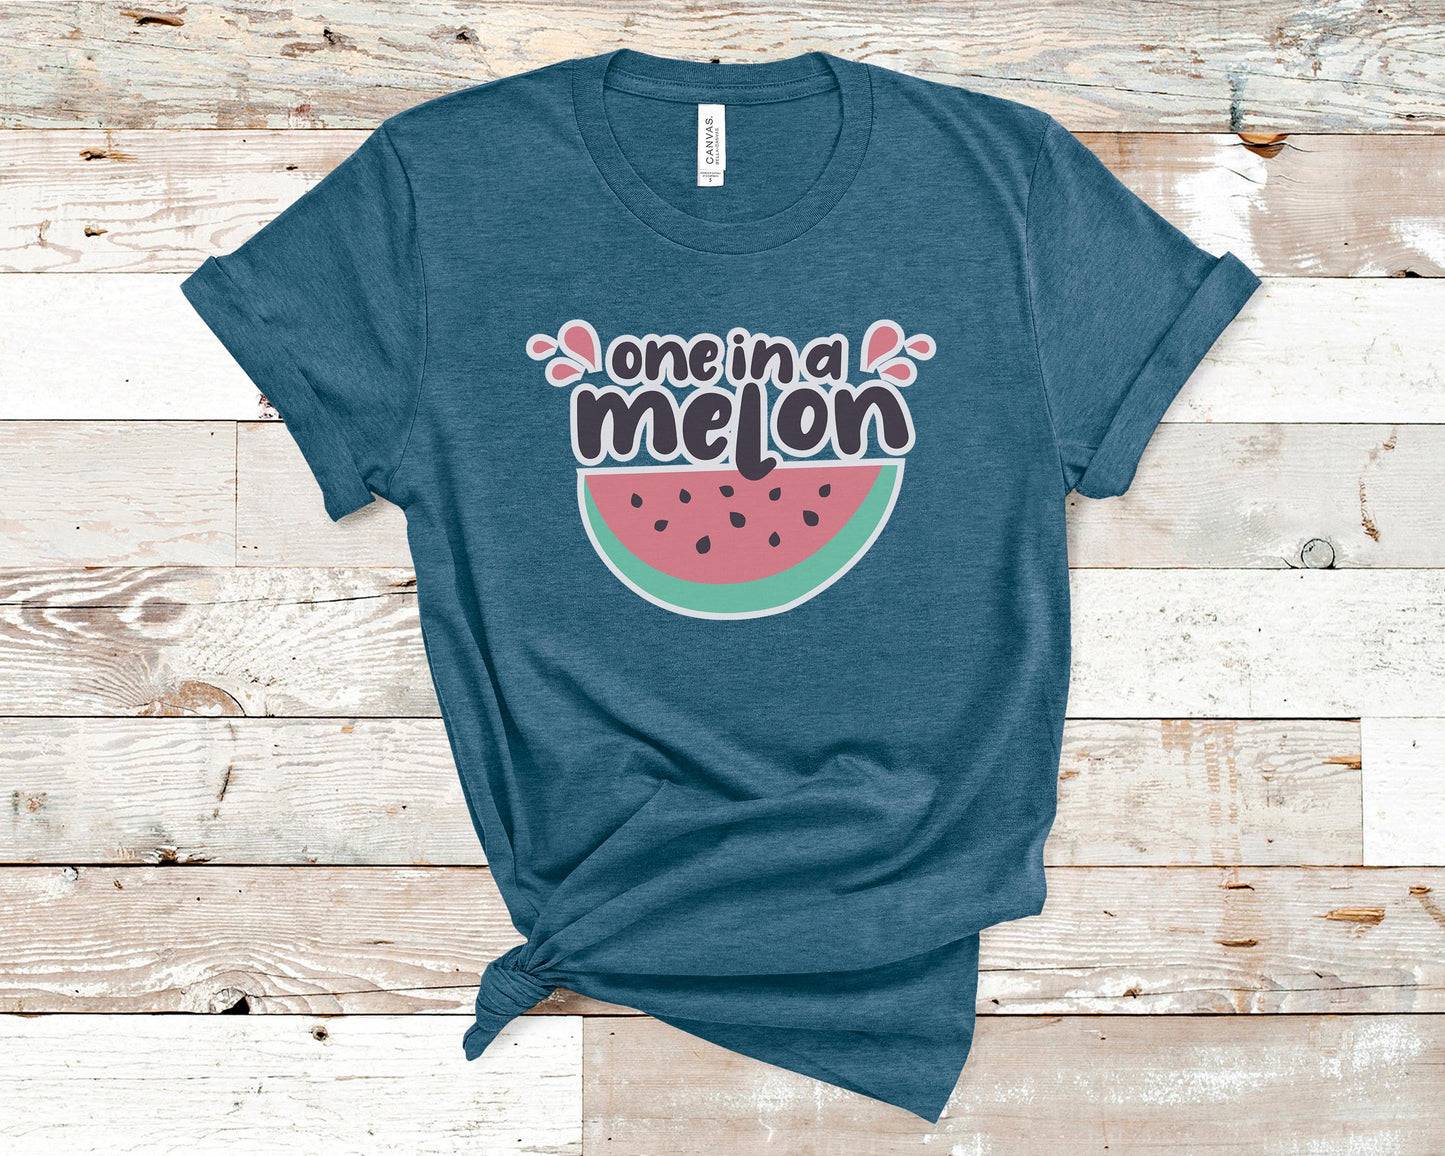 One in a Melon - Food